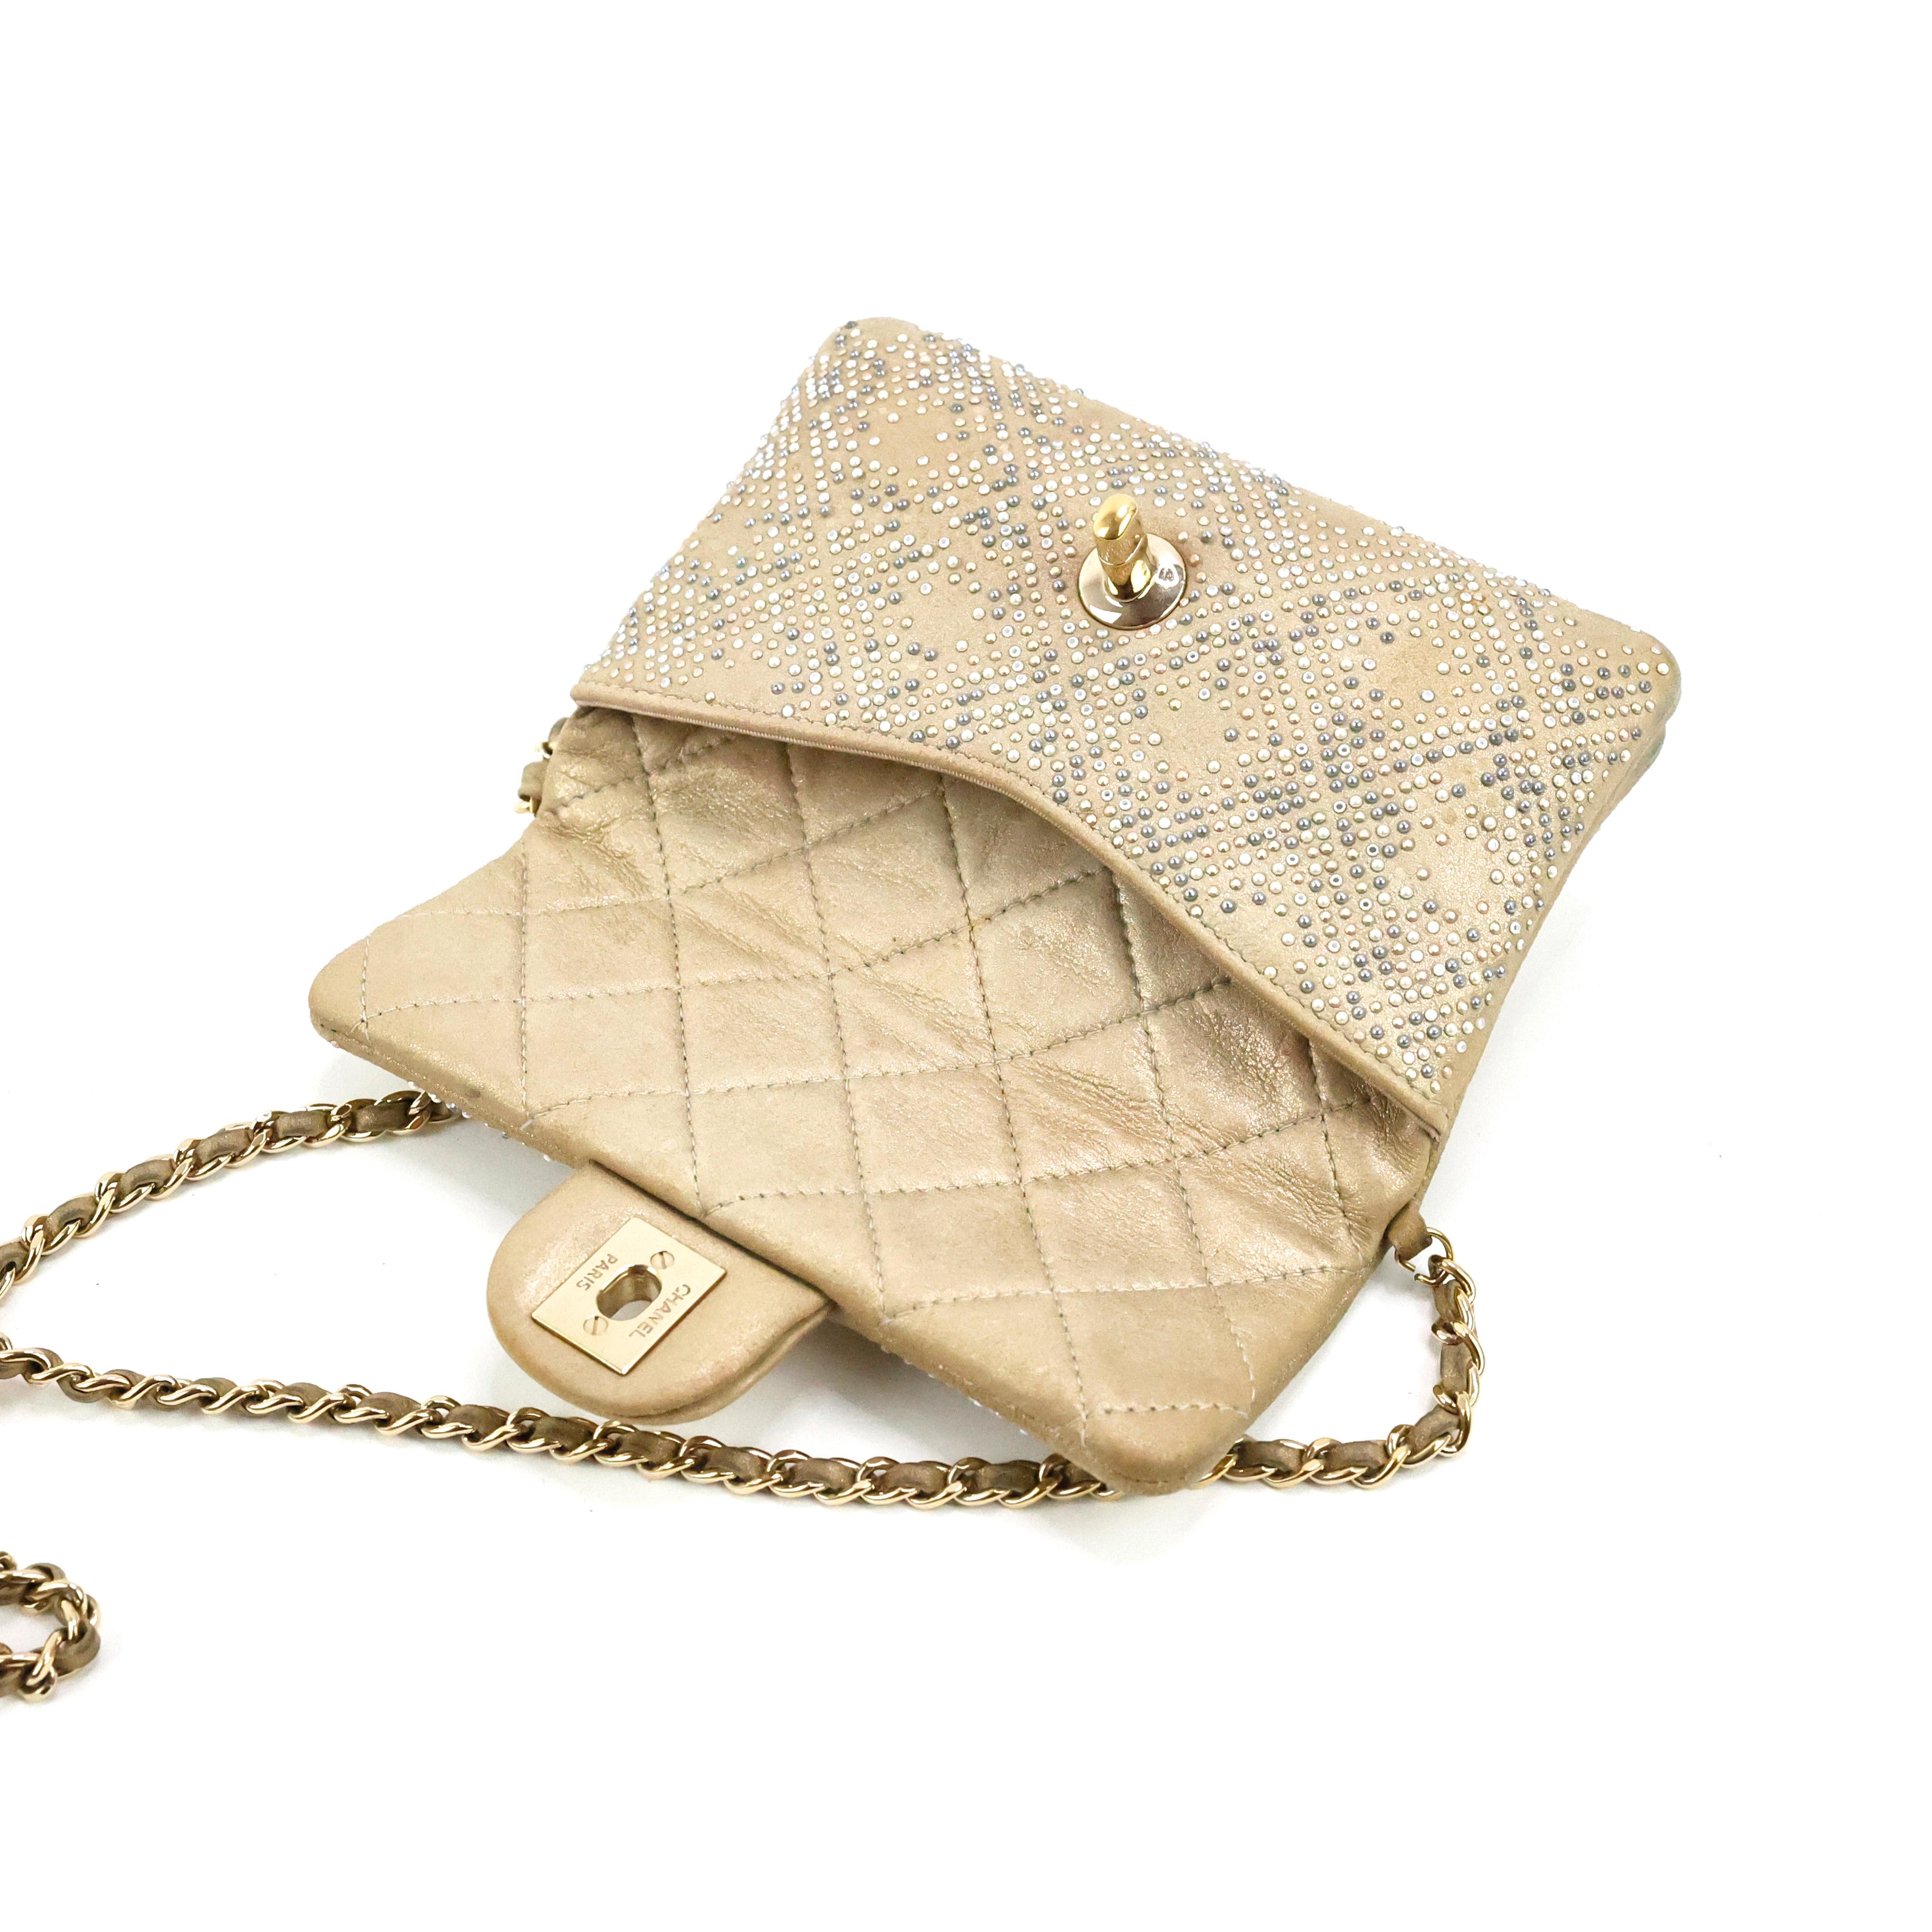 Chanel Embellished Gold Flap Bag In Fair Condition For Sale In Bressanone, IT